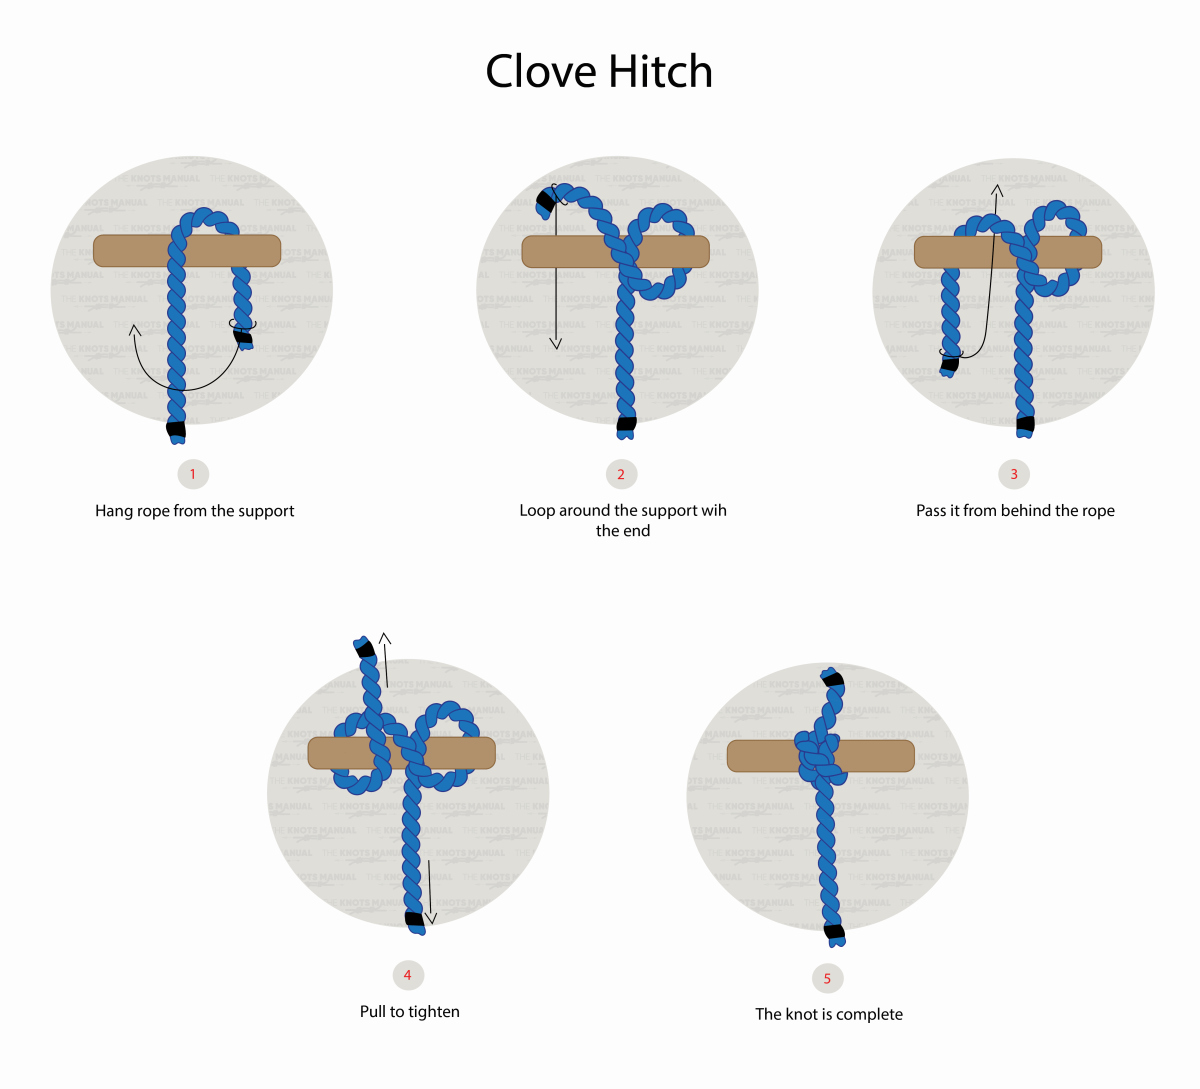 The Clove Hitch Knot